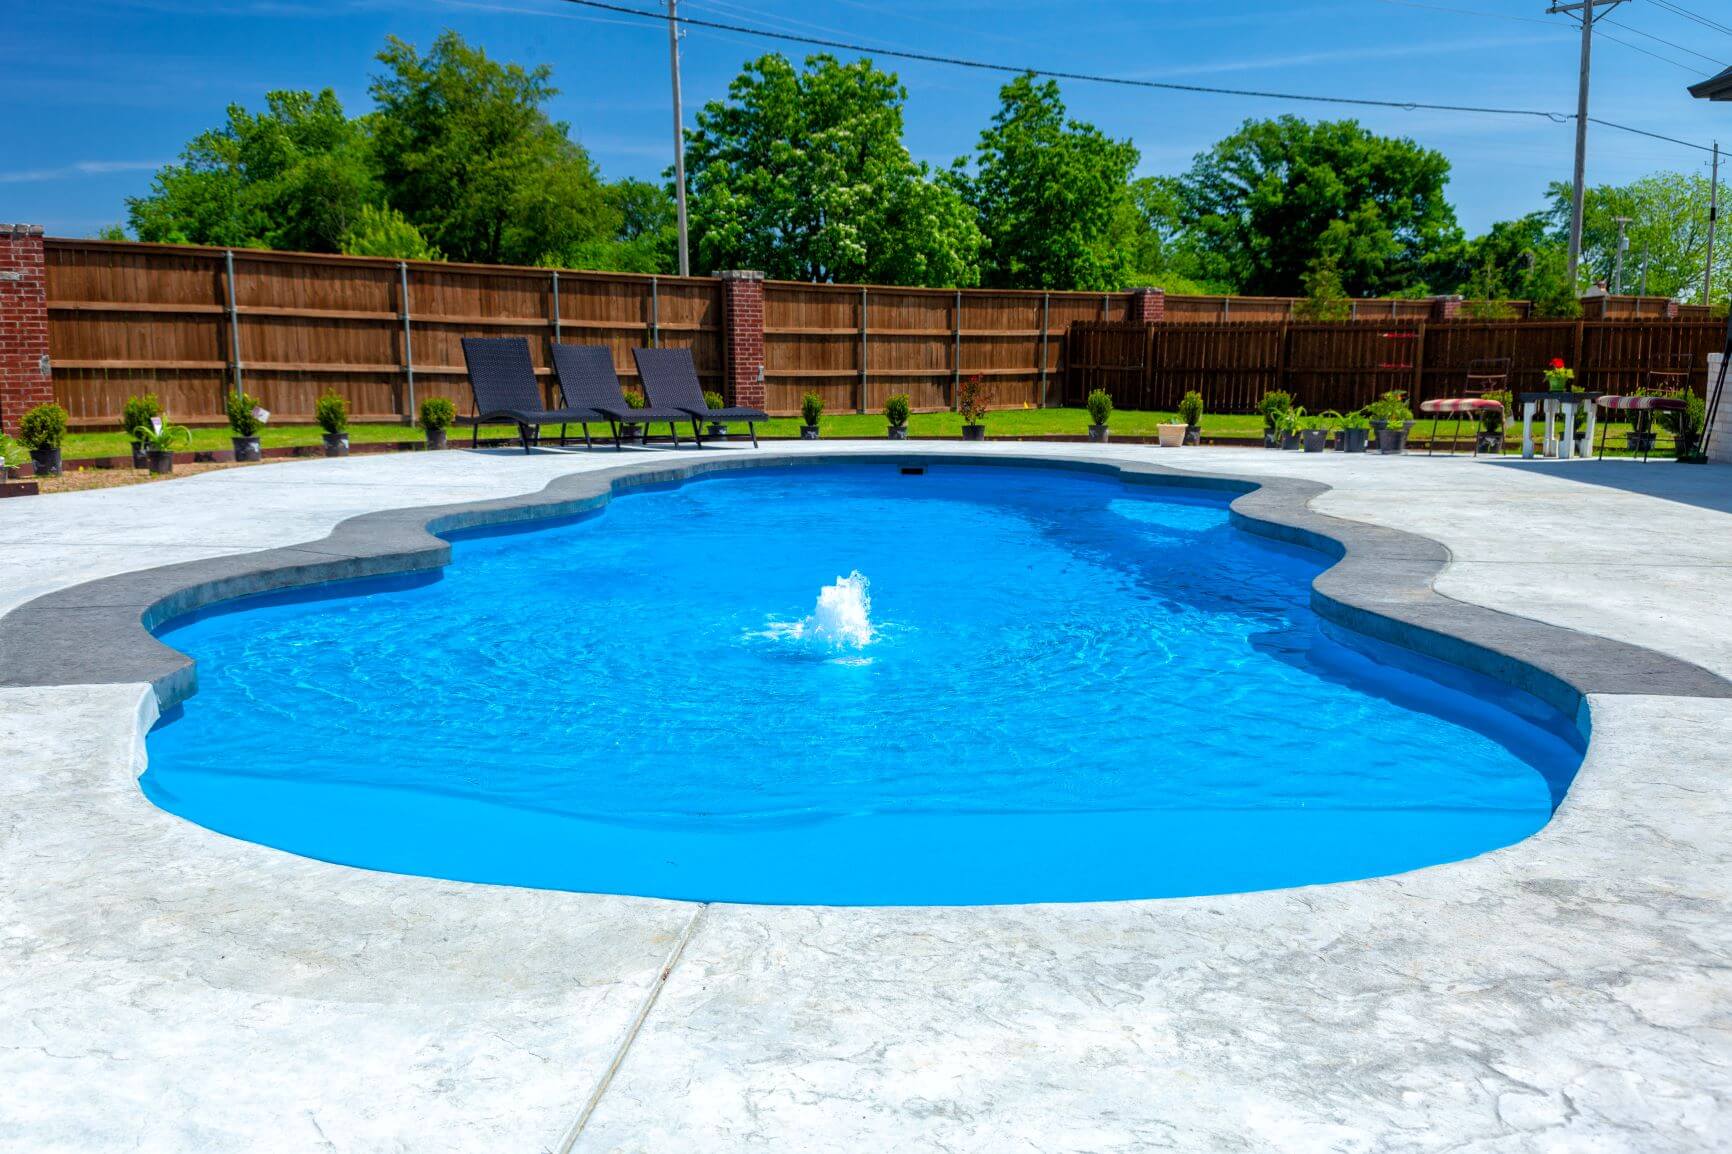 5 Things You Should Consider When Buying Beach Entry Fiberglass Pools